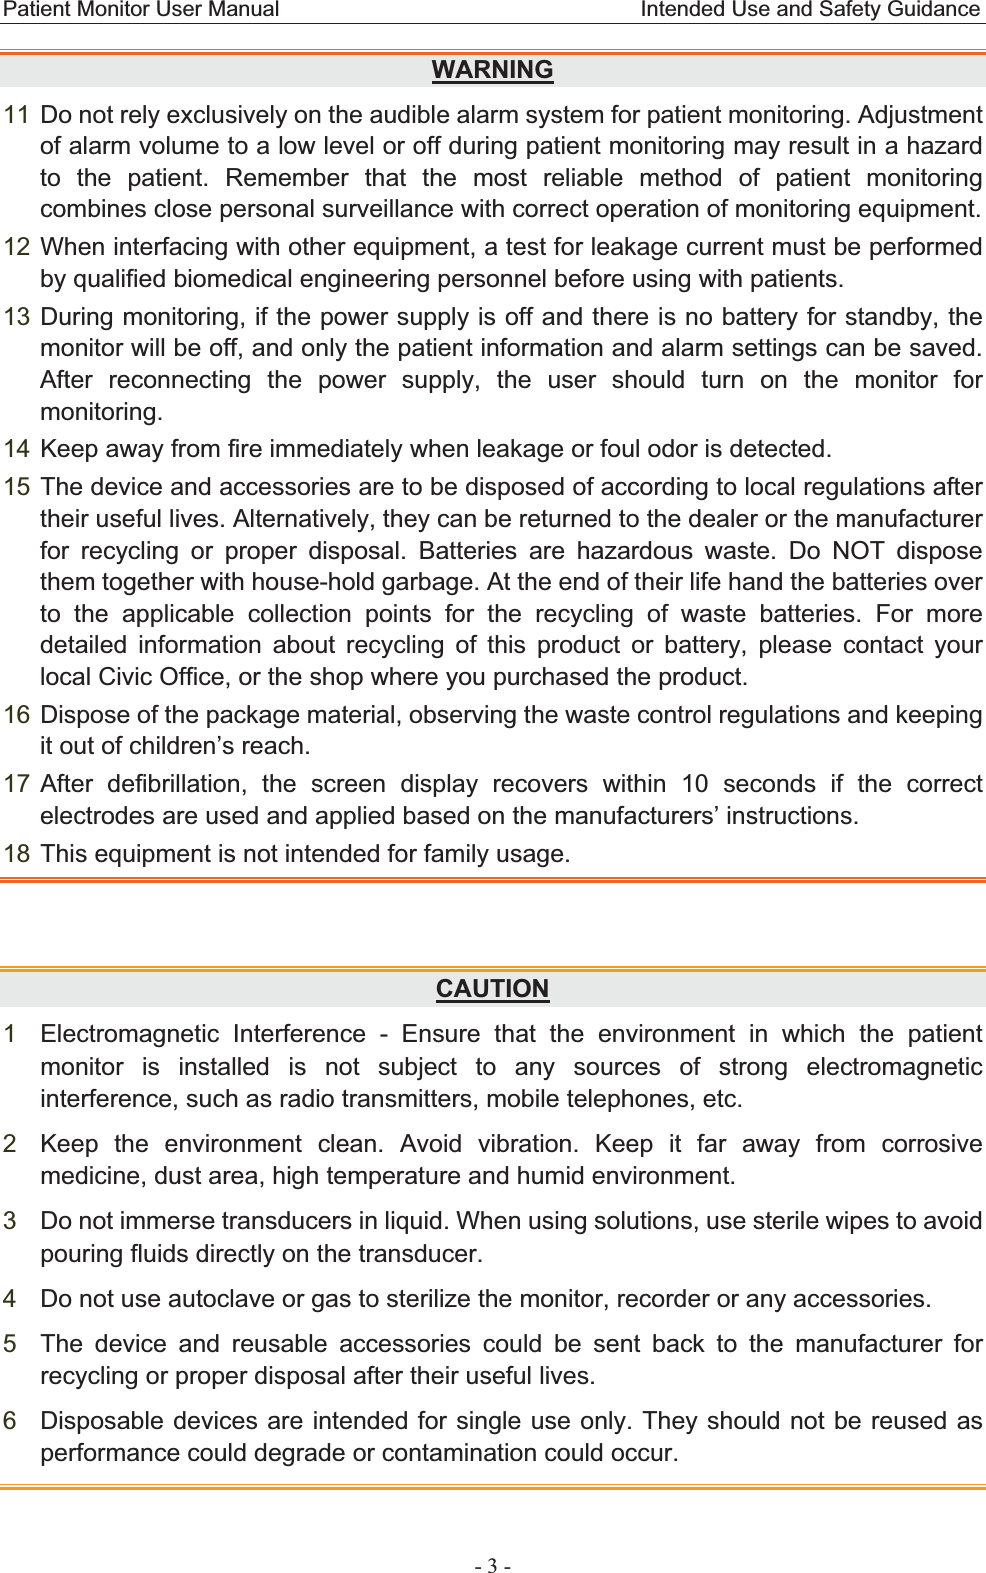 Patient Monitor User Manual                                 Intended Use and Safety Guidance  - 3 - WARNING11 Do not rely exclusively on the audible alarm system for patient monitoring. Adjustment of alarm volume to a low level or off during patient monitoring may result in a hazard to the patient. Remember that the most reliable method of patient monitoring combines close personal surveillance with correct operation of monitoring equipment. 12 When interfacing with other equipment, a test for leakage current must be performed by qualified biomedical engineering personnel before using with patients. 13 During monitoring, if the power supply is off and there is no battery for standby, the monitor will be off, and only the patient information and alarm settings can be saved. After reconnecting the power supply, the user should turn on the monitor for monitoring.14 Keep away from fire immediately when leakage or foul odor is detected. 15 The device and accessories are to be disposed of according to local regulations after their useful lives. Alternatively, they can be returned to the dealer or the manufacturer for recycling or proper disposal. Batteries are hazardous waste. Do NOT dispose them together with house-hold garbage. At the end of their life hand the batteries over to the applicable collection points for the recycling of waste batteries. For more detailed information about recycling of this product or battery, please contact your local Civic Office, or the shop where you purchased the product. 16 Dispose of the package material, observing the waste control regulations and keeping it out of children’s reach. 17 After defibrillation, the screen display recovers within 10 seconds if the correct electrodes are used and applied based on the manufacturers’ instructions. 18 This equipment is not intended for family usage. CAUTION1Electromagnetic Interference - Ensure that the environment in which the patient monitor is installed is not subject to any sources of strong electromagnetic interference, such as radio transmitters, mobile telephones, etc. 2Keep the environment clean. Avoid vibration. Keep it far away from corrosive medicine, dust area, high temperature and humid environment. 3Do not immerse transducers in liquid. When using solutions, use sterile wipes to avoid pouring fluids directly on the transducer. 4Do not use autoclave or gas to sterilize the monitor, recorder or any accessories. 5The device and reusable accessories could be sent back to the manufacturer for recycling or proper disposal after their useful lives. 6Disposable devices are intended for single use only. They should not be reused as performance could degrade or contamination could occur. 